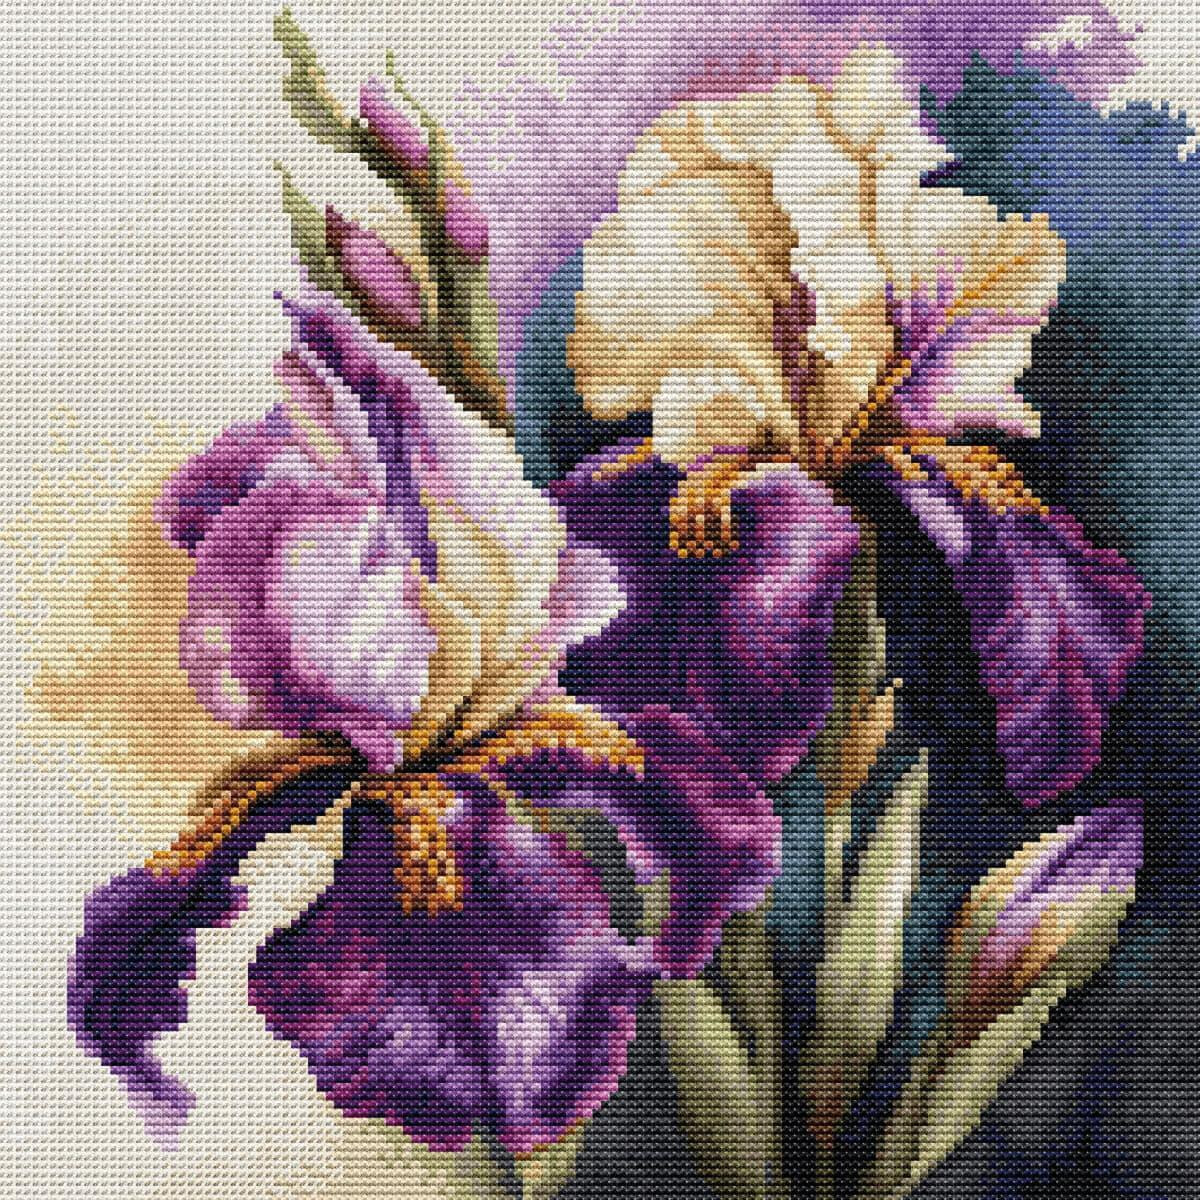 A detailed cross stitch embroidery kit from Luca-S...